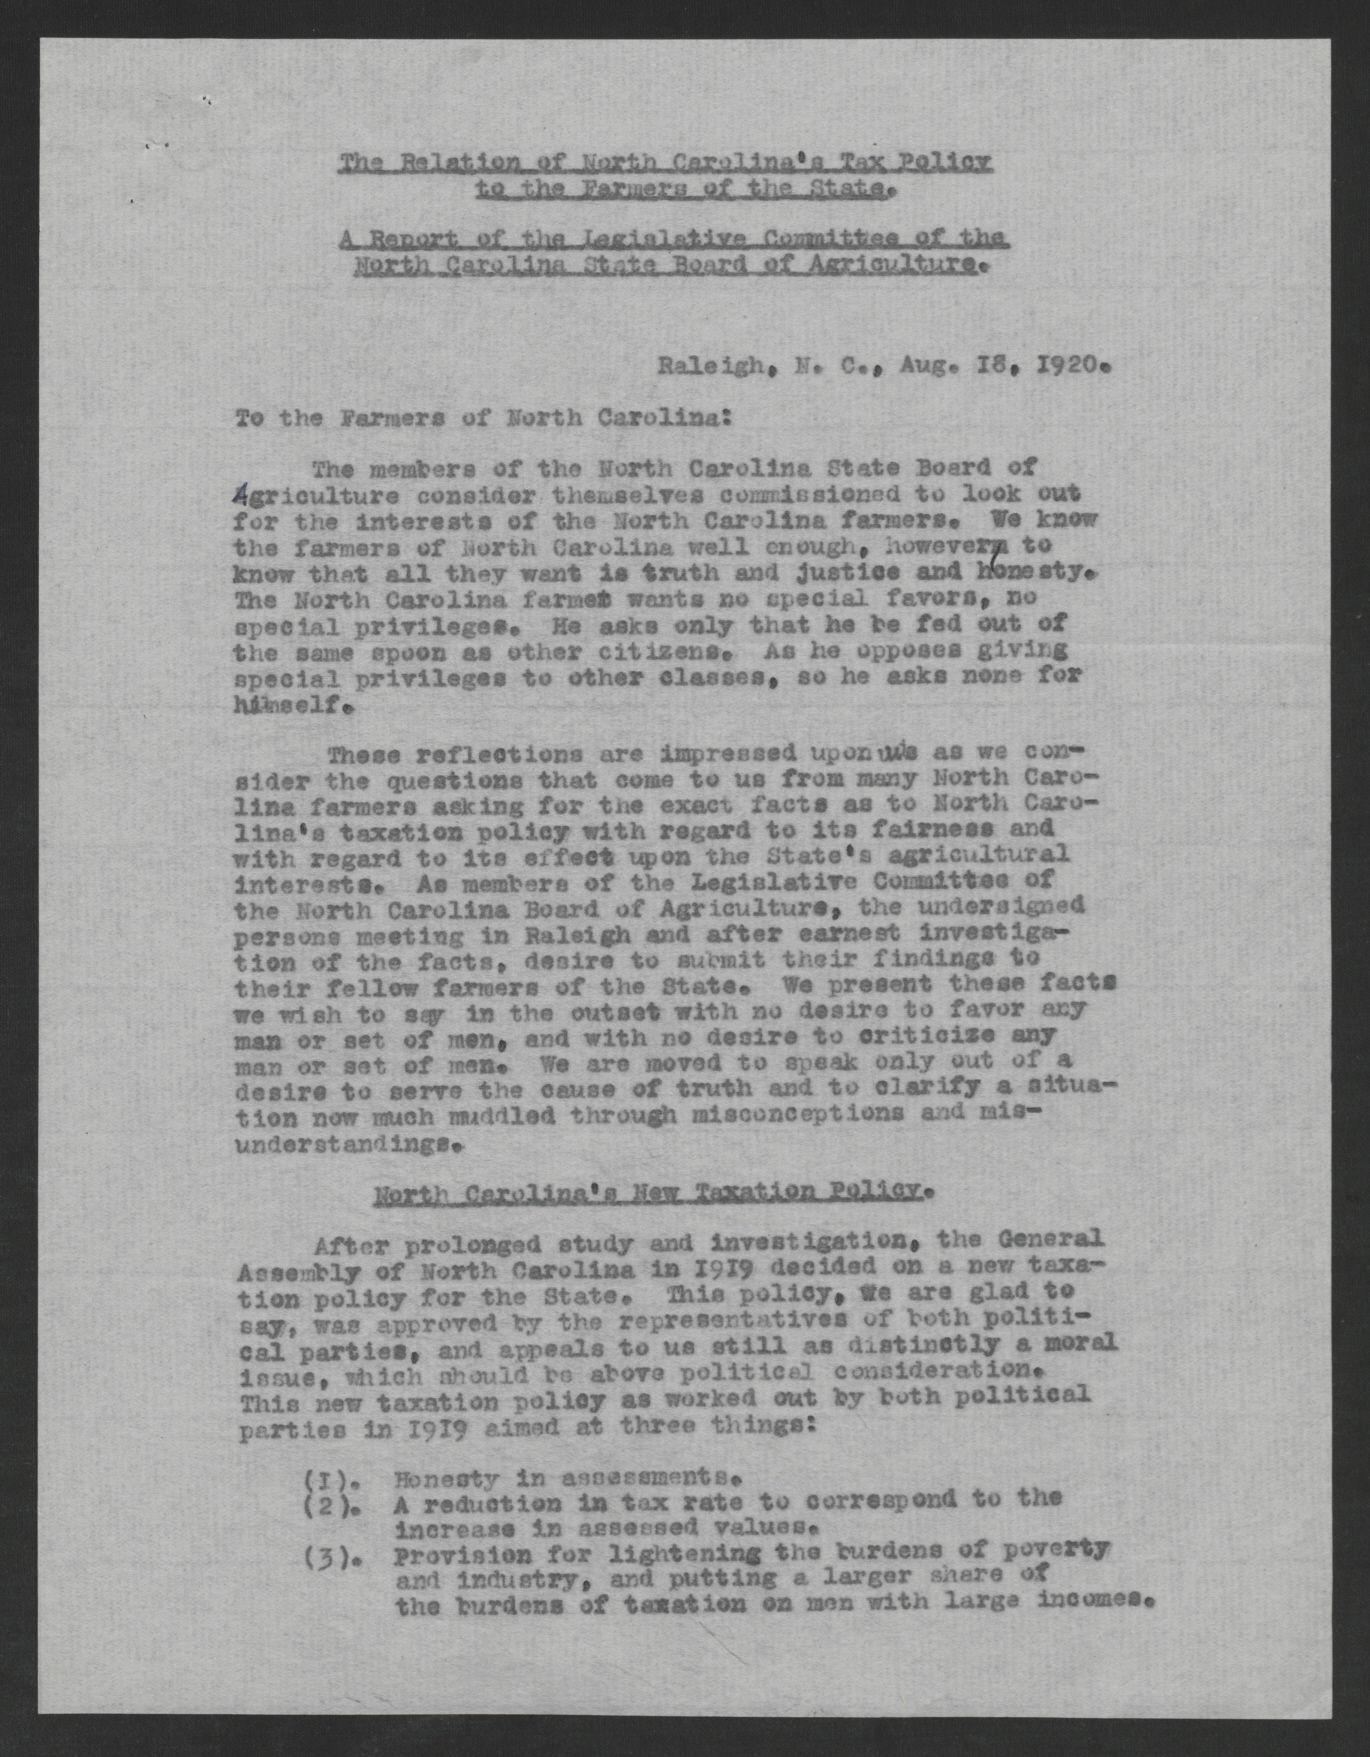 Report of the Legislative Committee of the North Carolina State Board of Agriculture, August 18, 1920, page 1